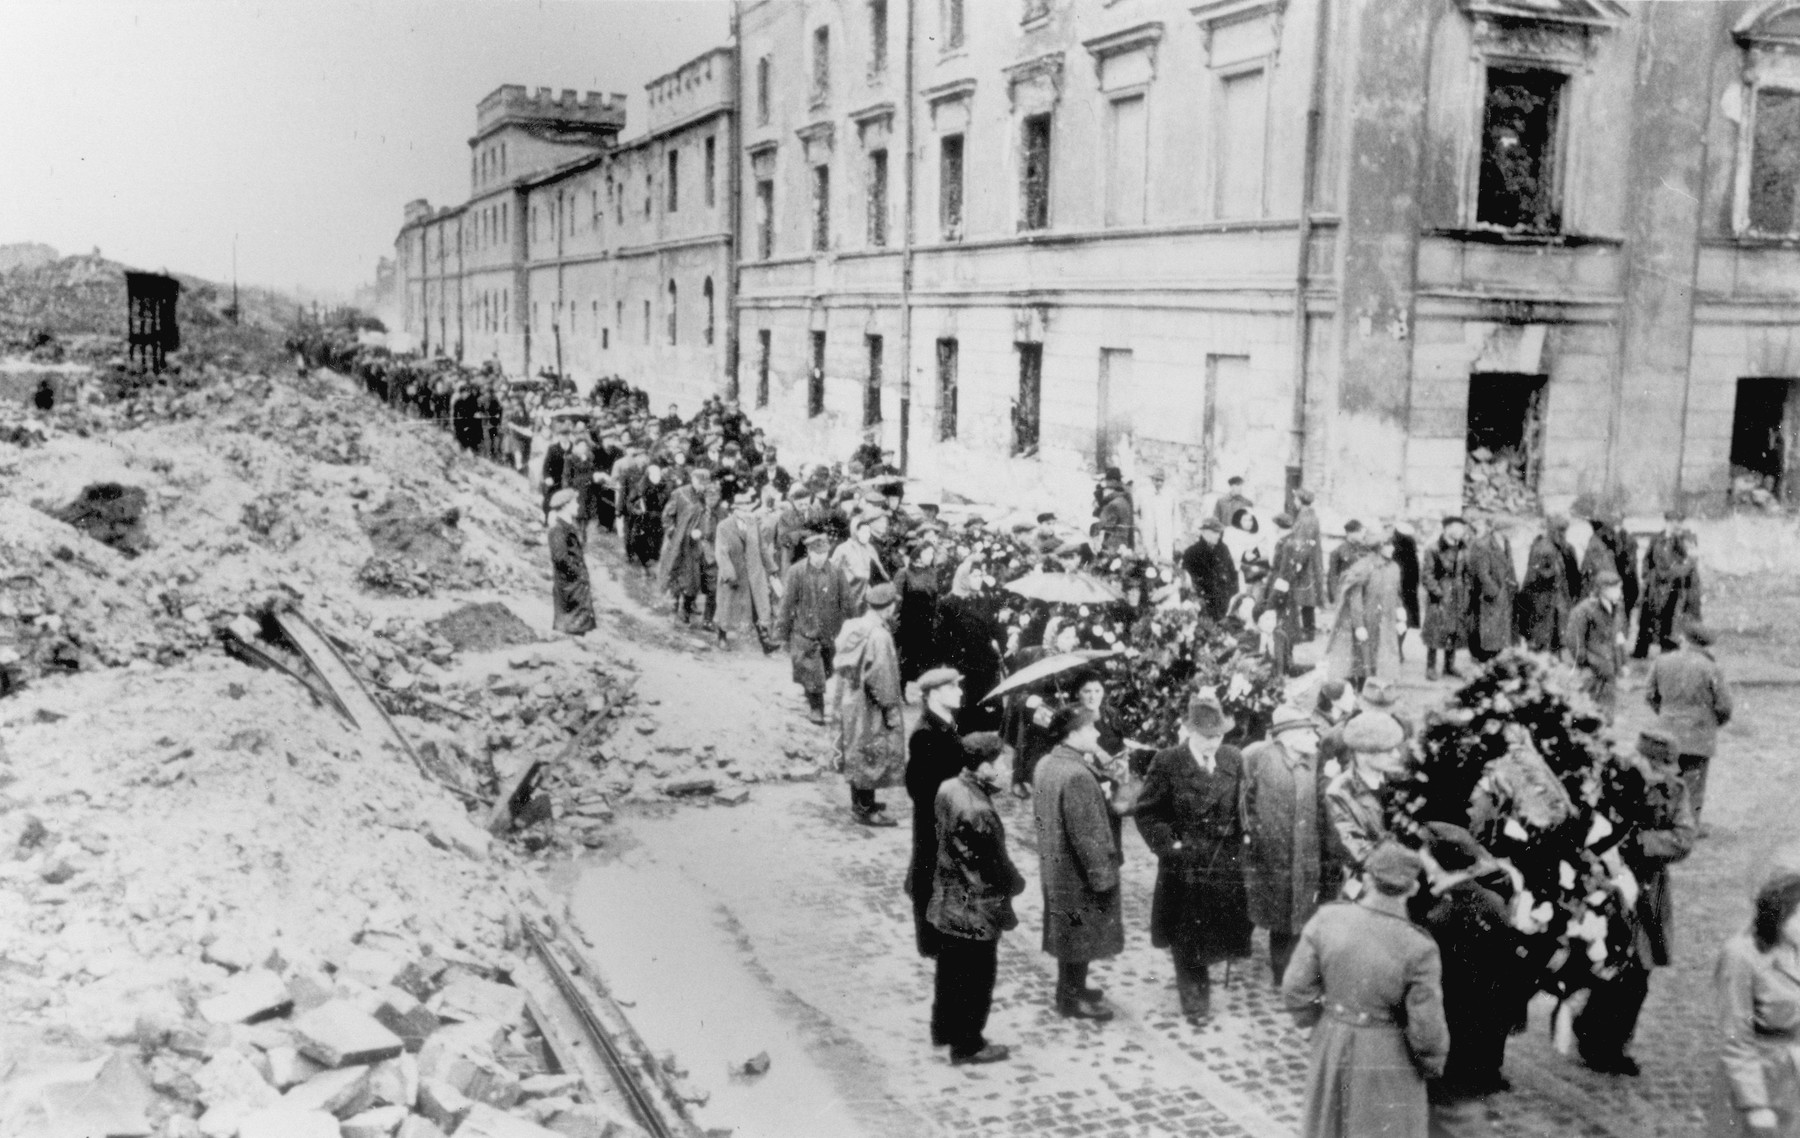 Jewish survivors carrying flags march through the ruins of the Warsaw ghetto [probably during a demonstration marking the fourth anniversary of the Warsaw ghetto uprising].